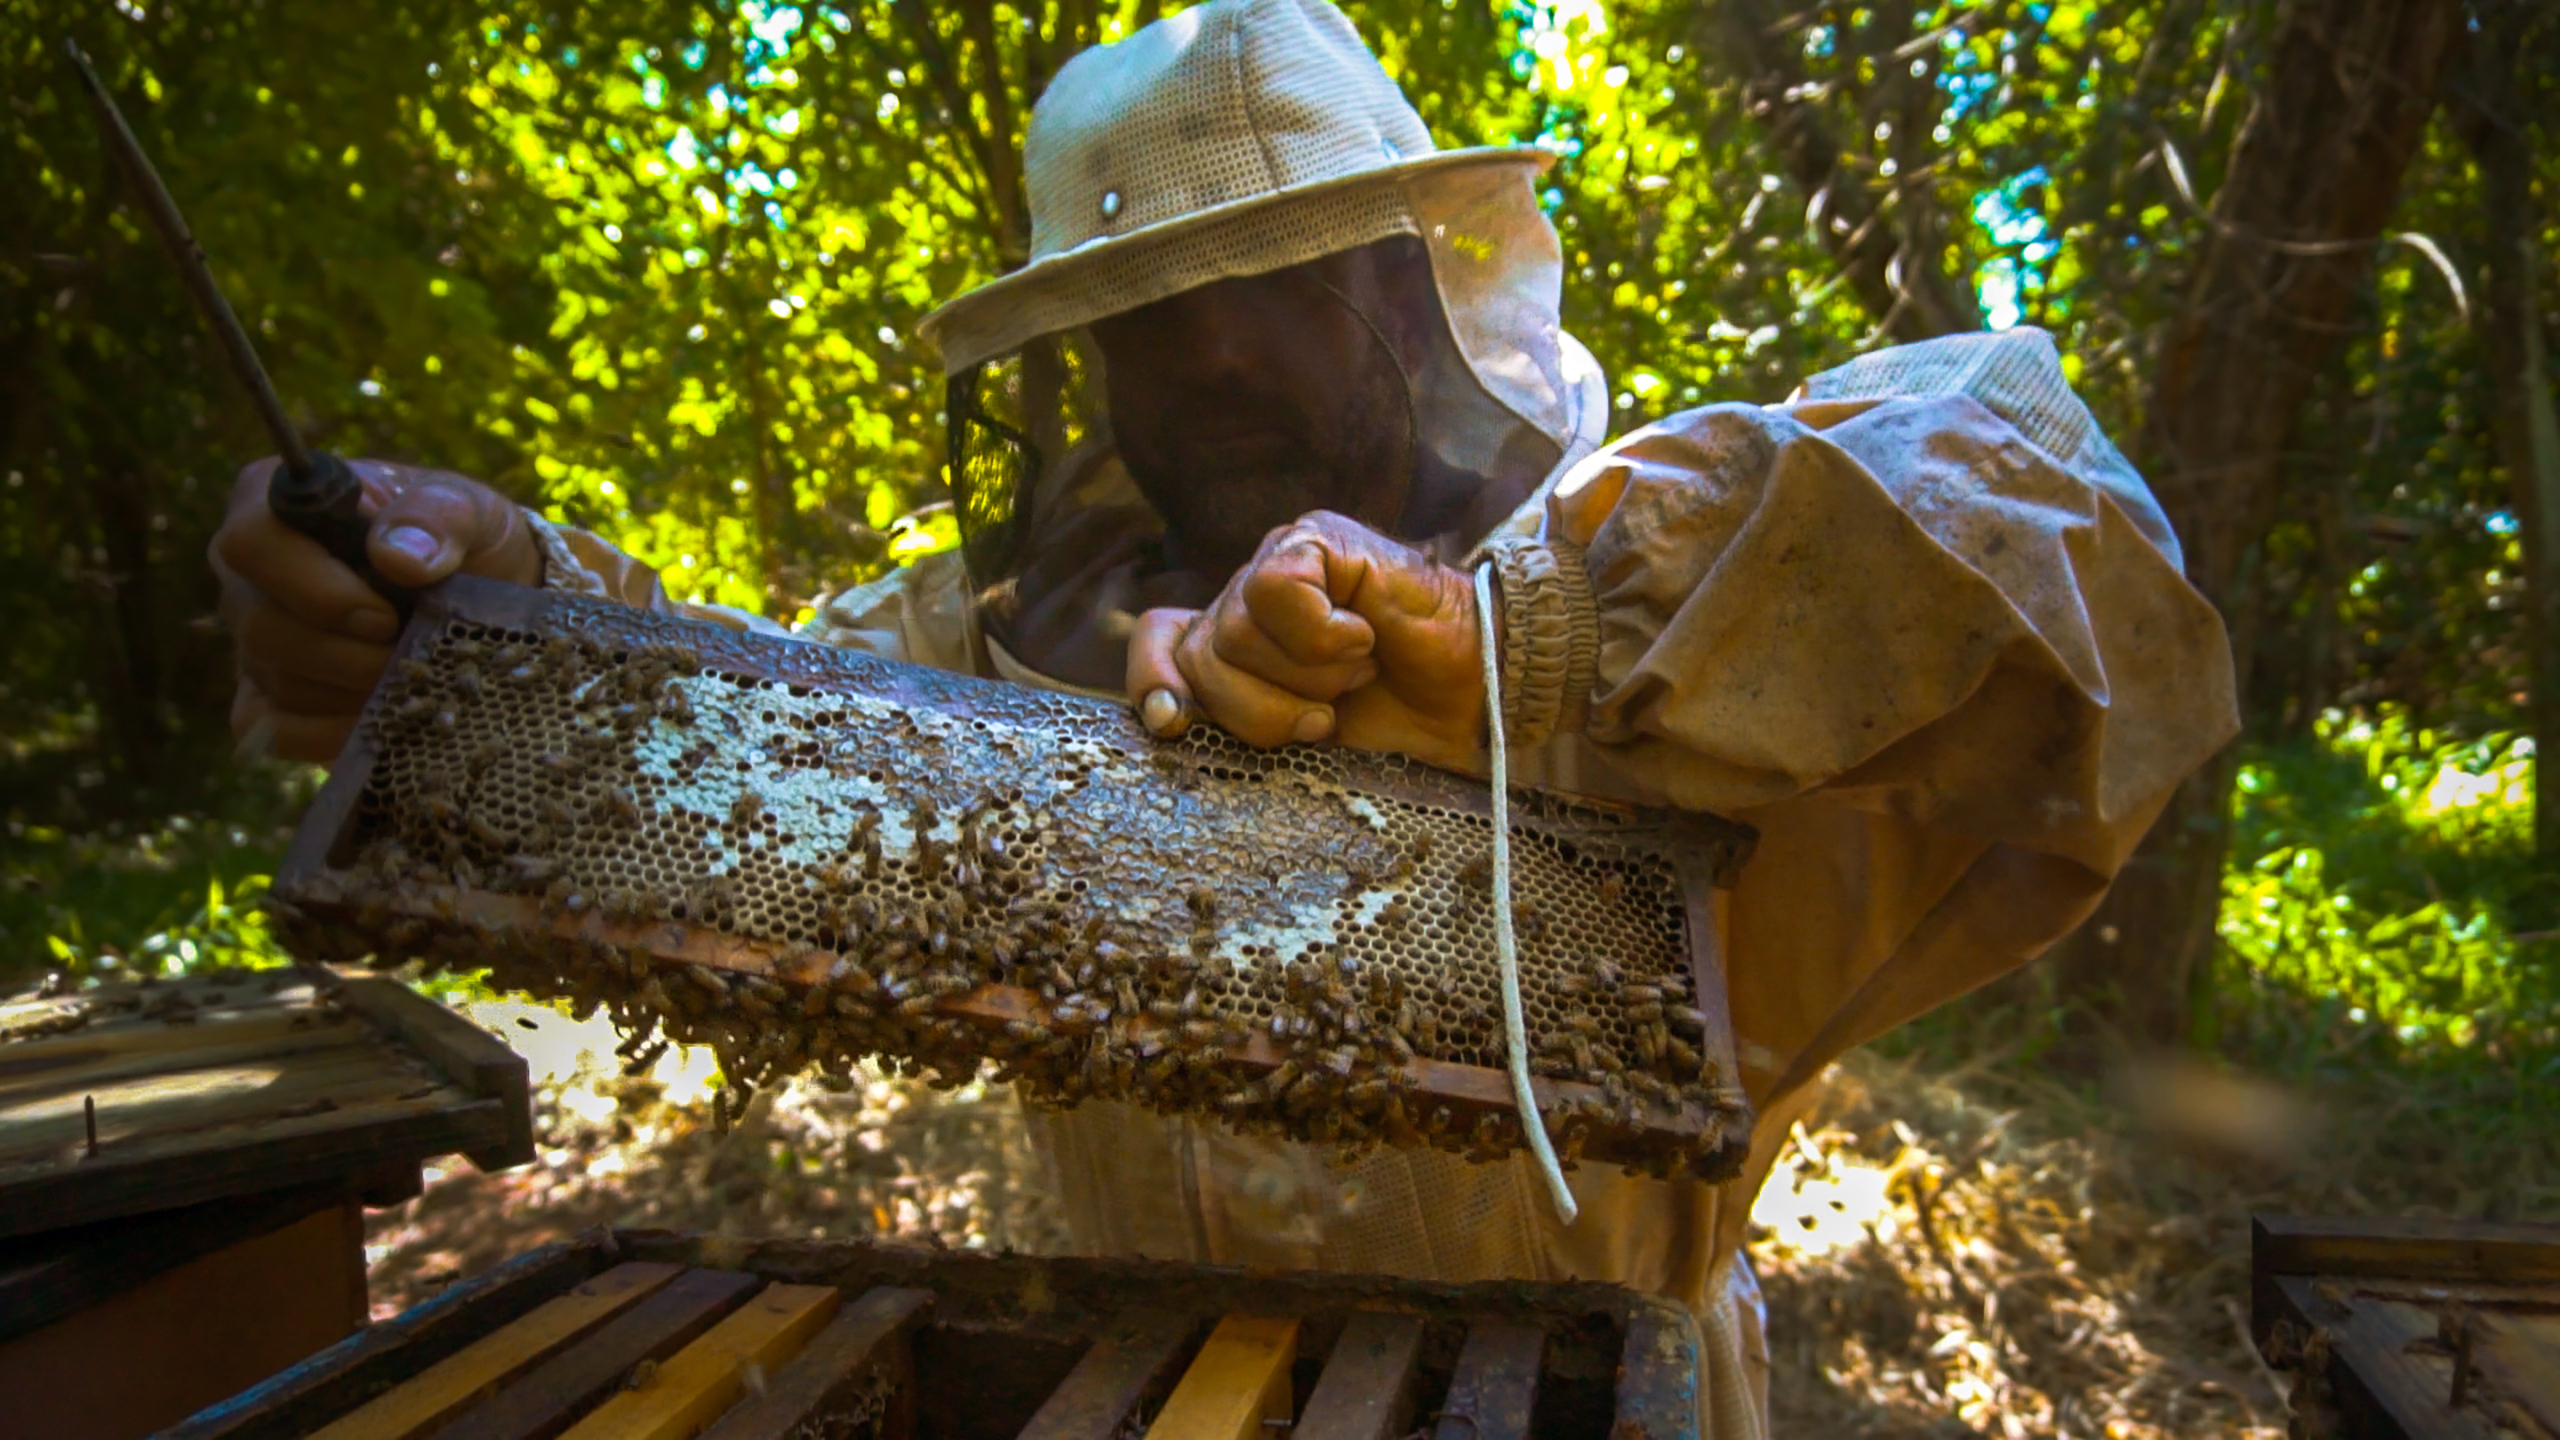 Bees are an important source of income for hundreds of people in the region